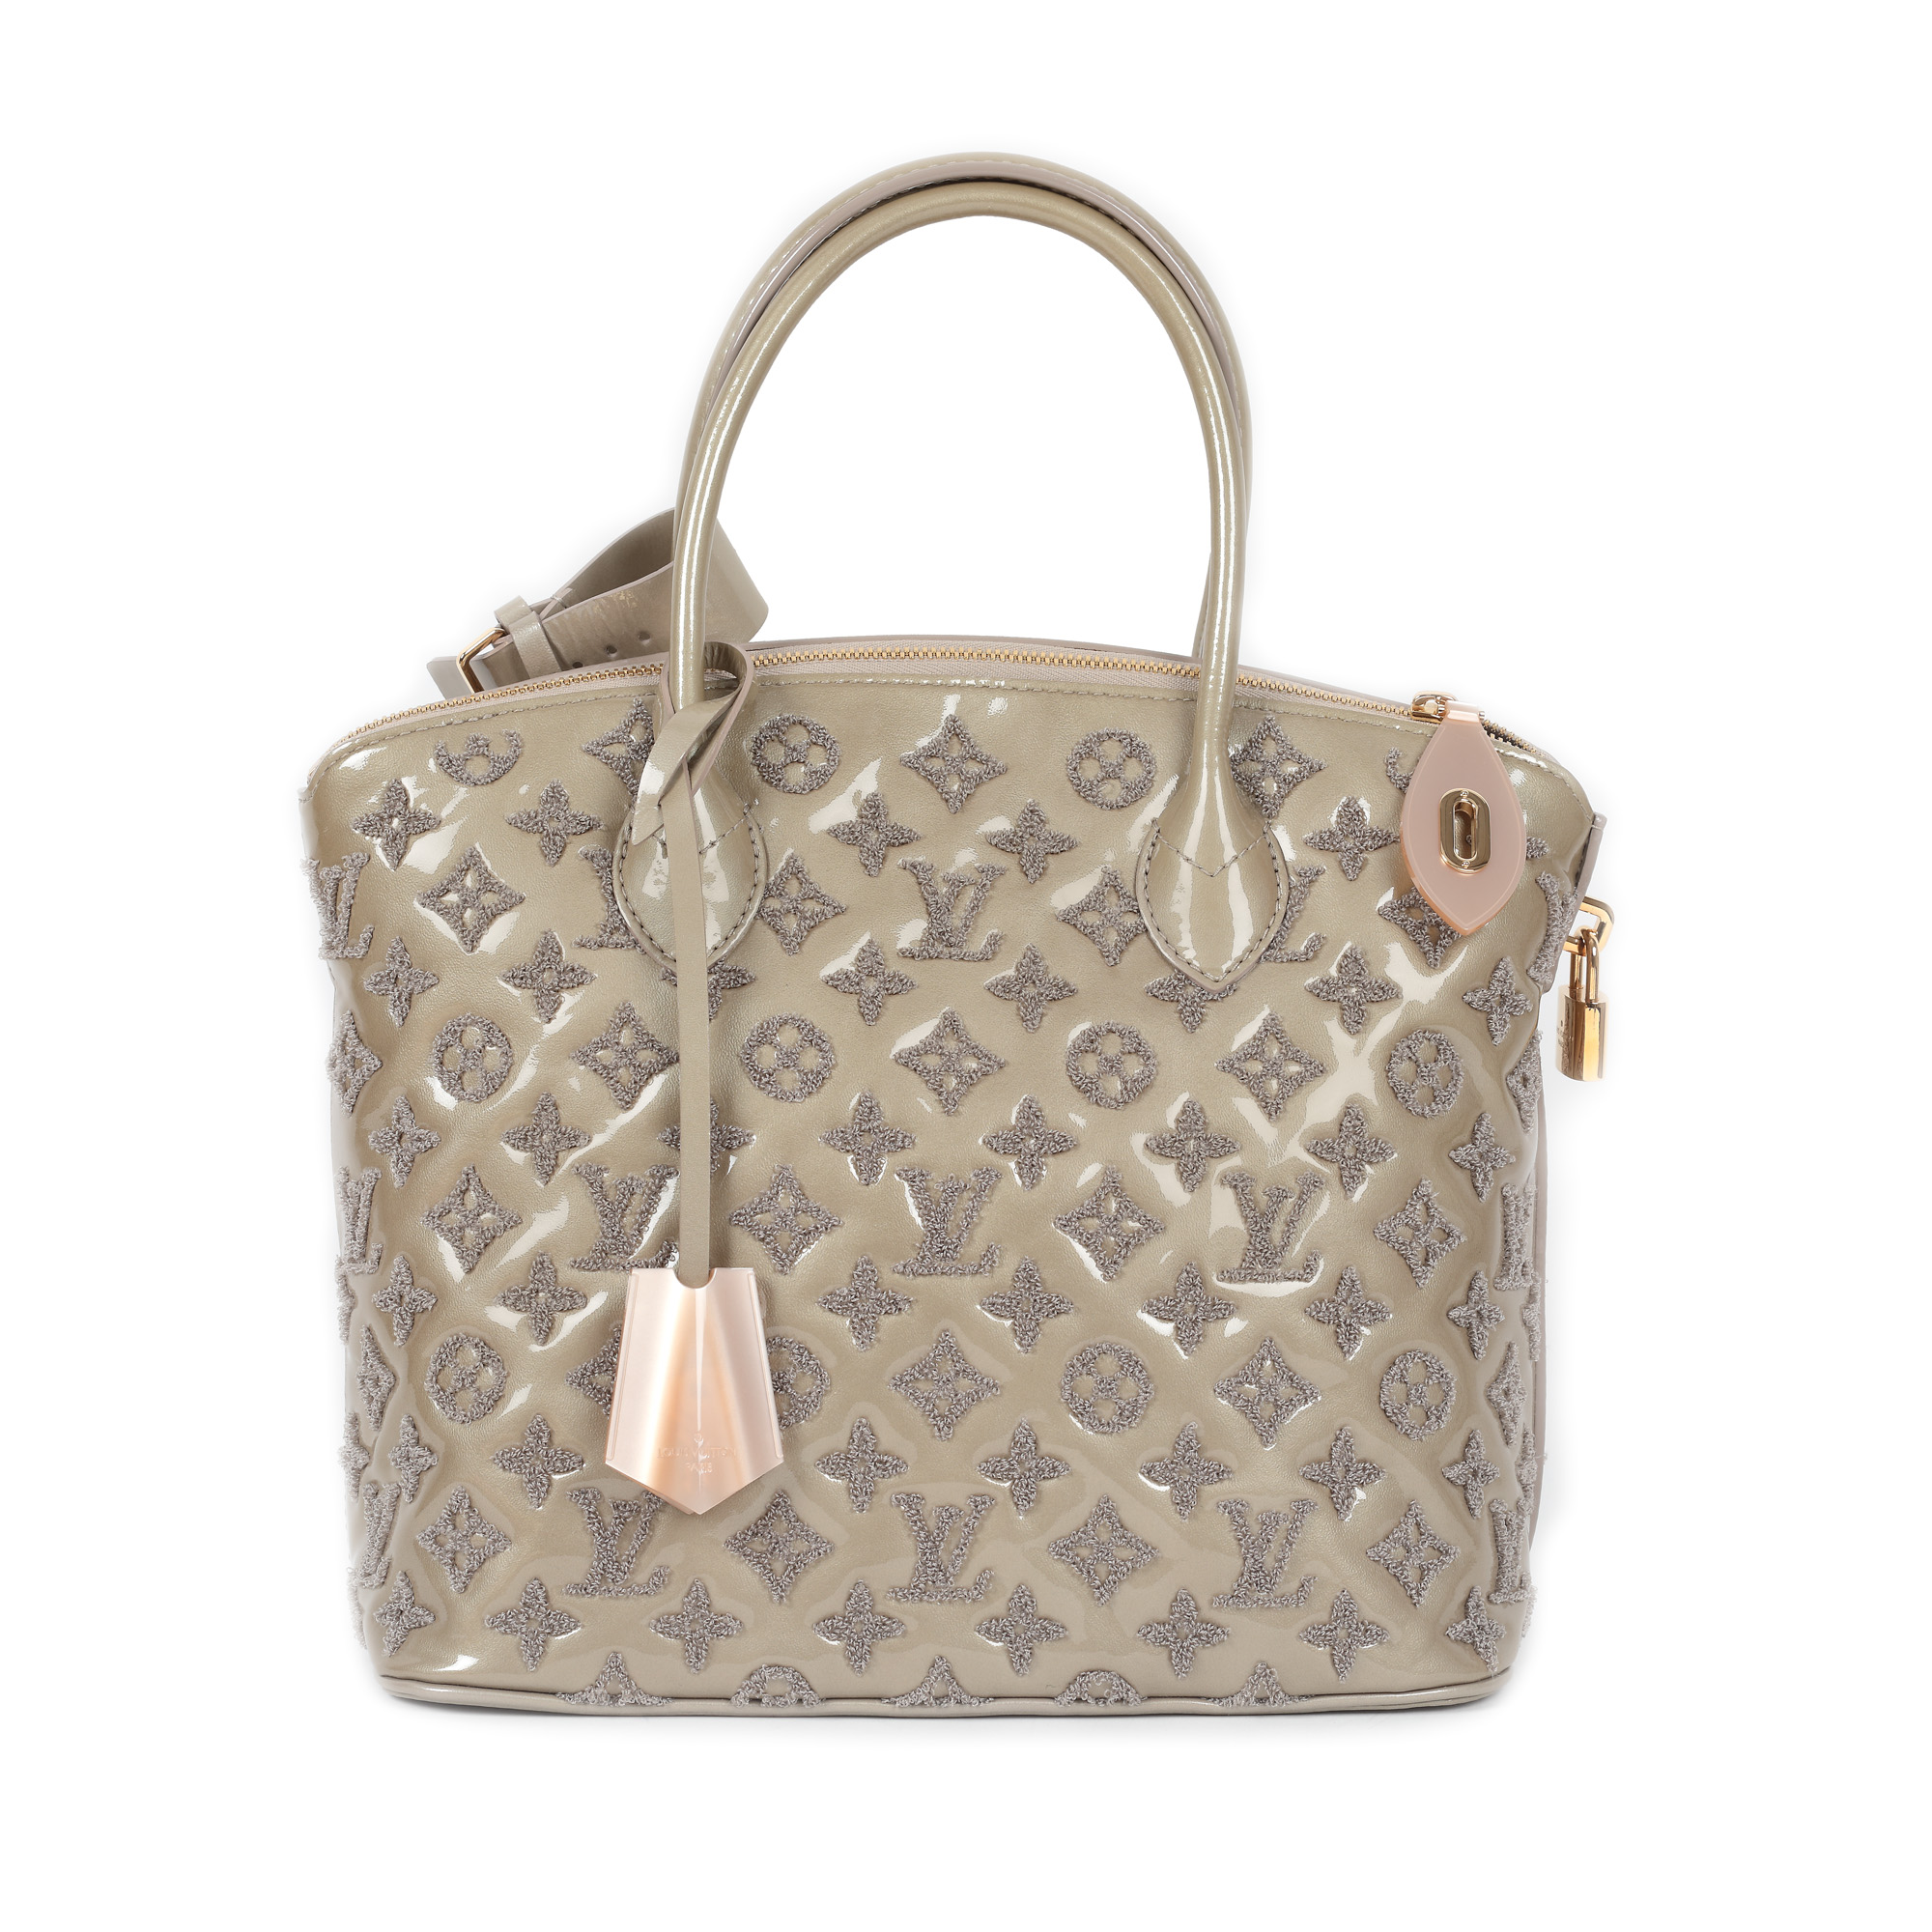 "Fascination Lockit Bag" - Louis Vuitton bag, leather, beige, embroidered monogram, limited edition,